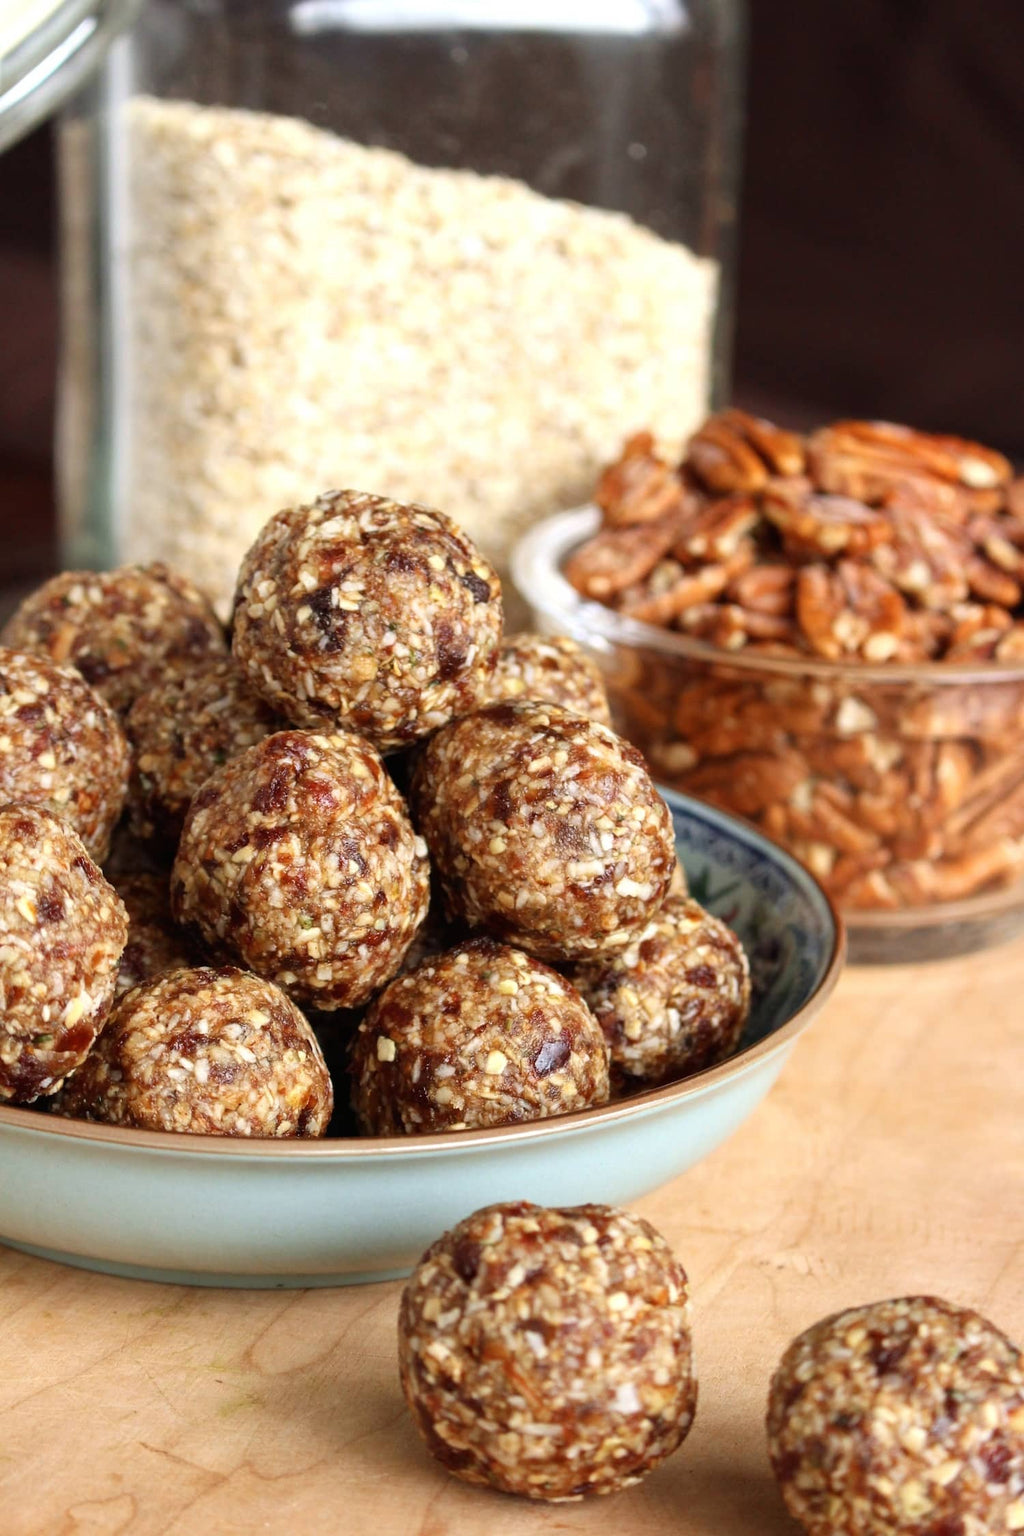 Pecan Energy Date Balls infused with Wild crafted Sea Moss and Superfoods